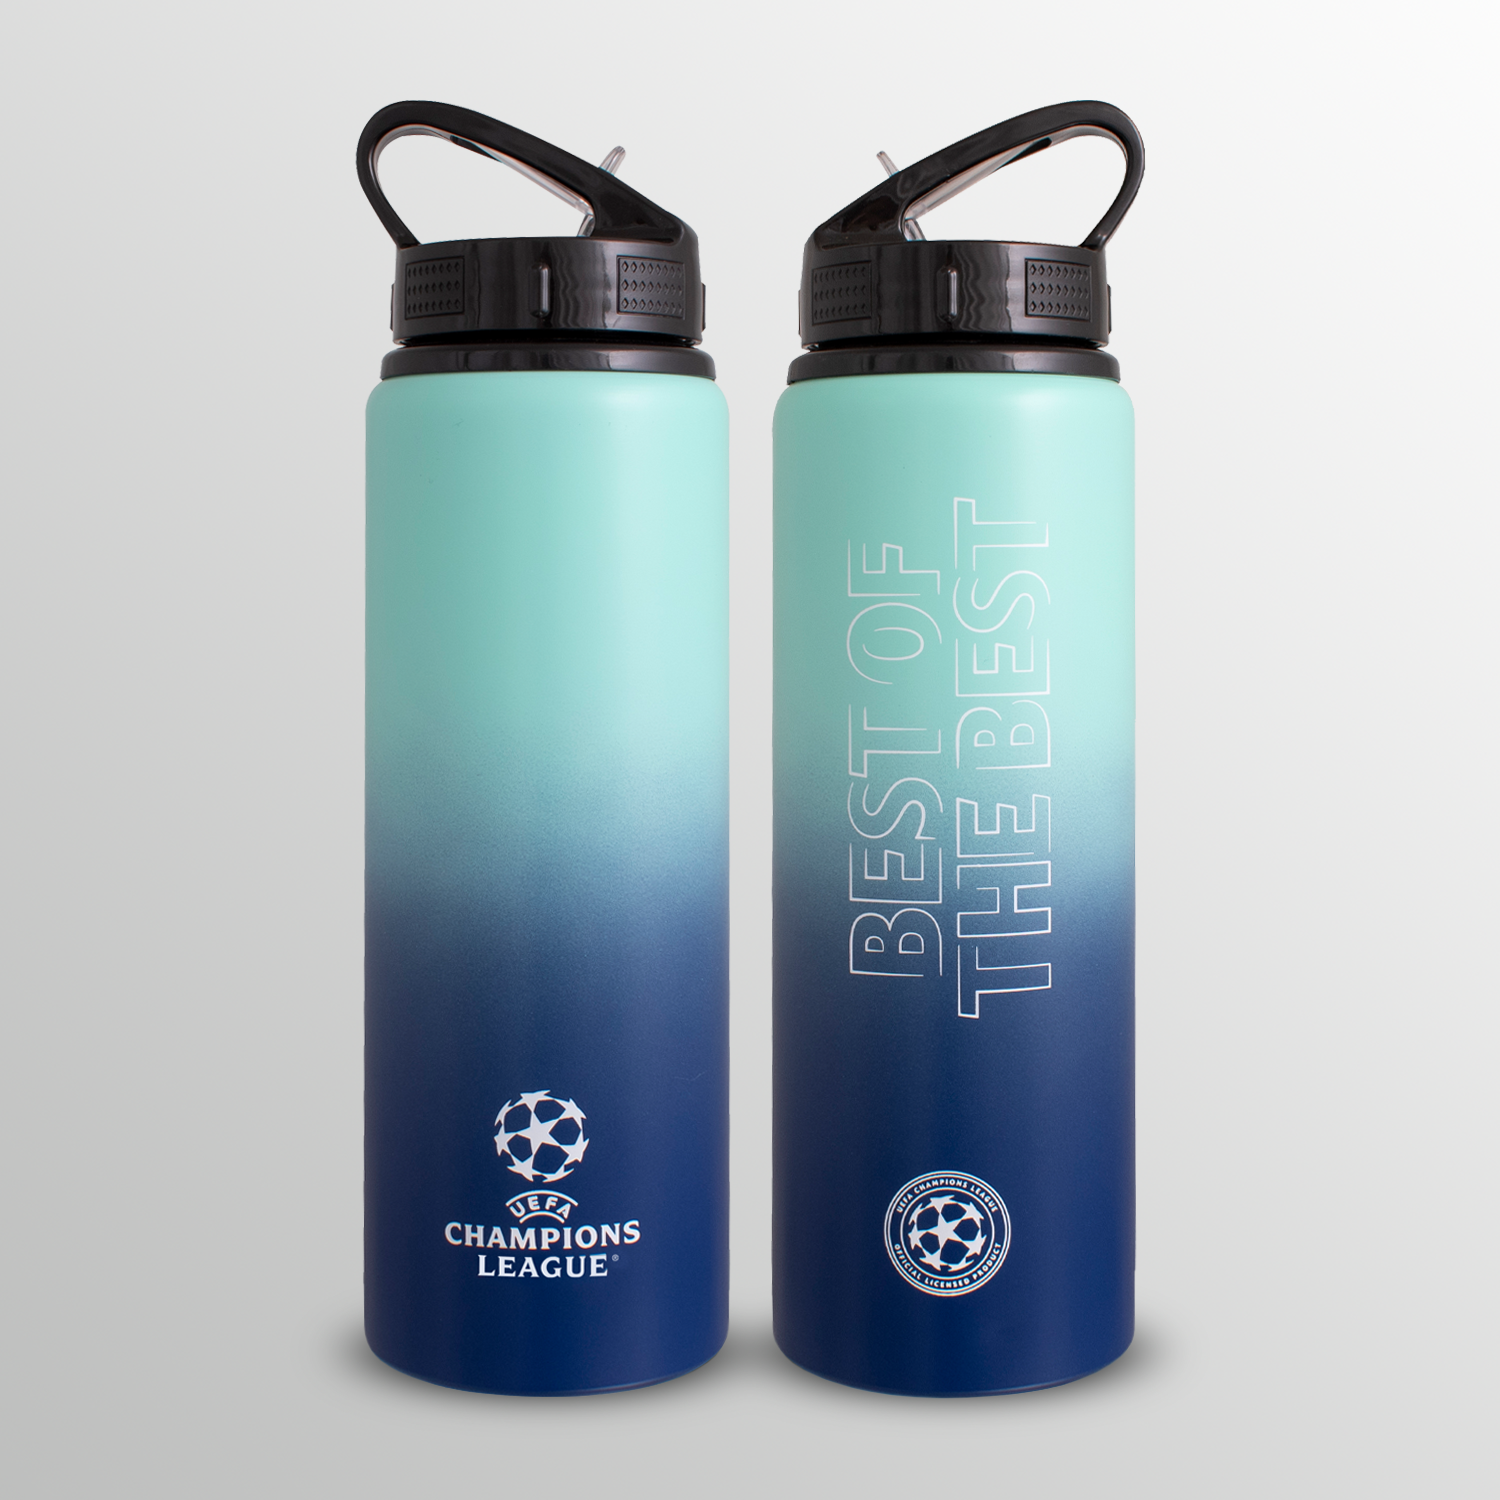 UEFA Champions League 750ml Aluminium Fade Water Bottle UEFA Club Competitions Online Store